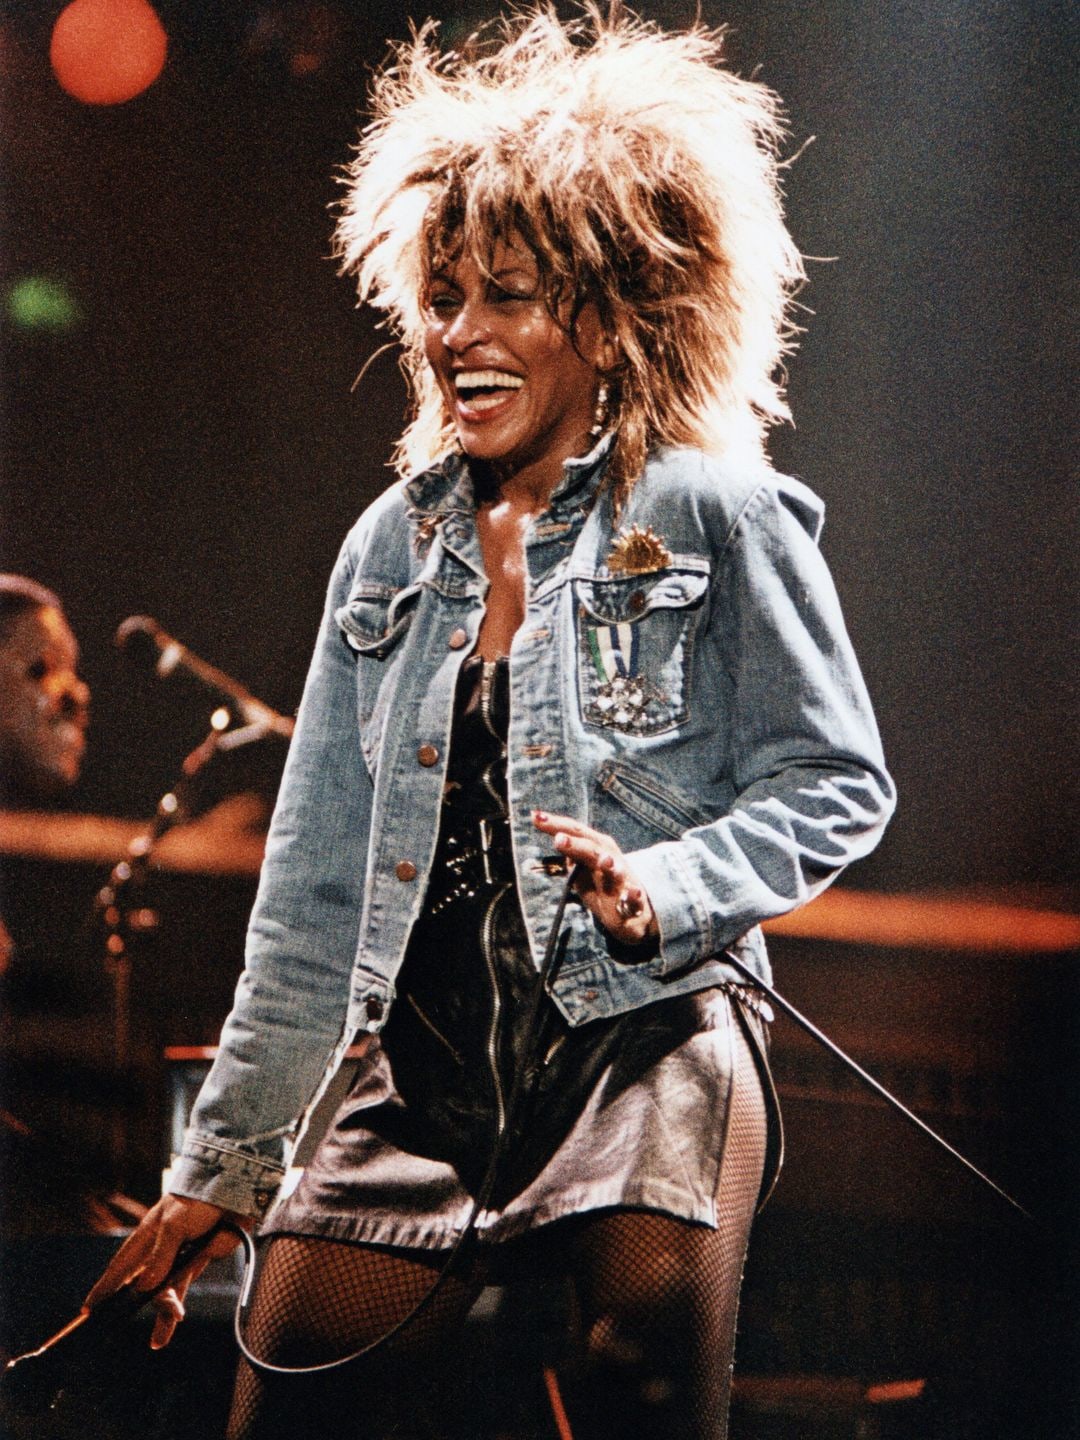 Tina Turner wearing a denim jacket and a leather zip-up mini dress